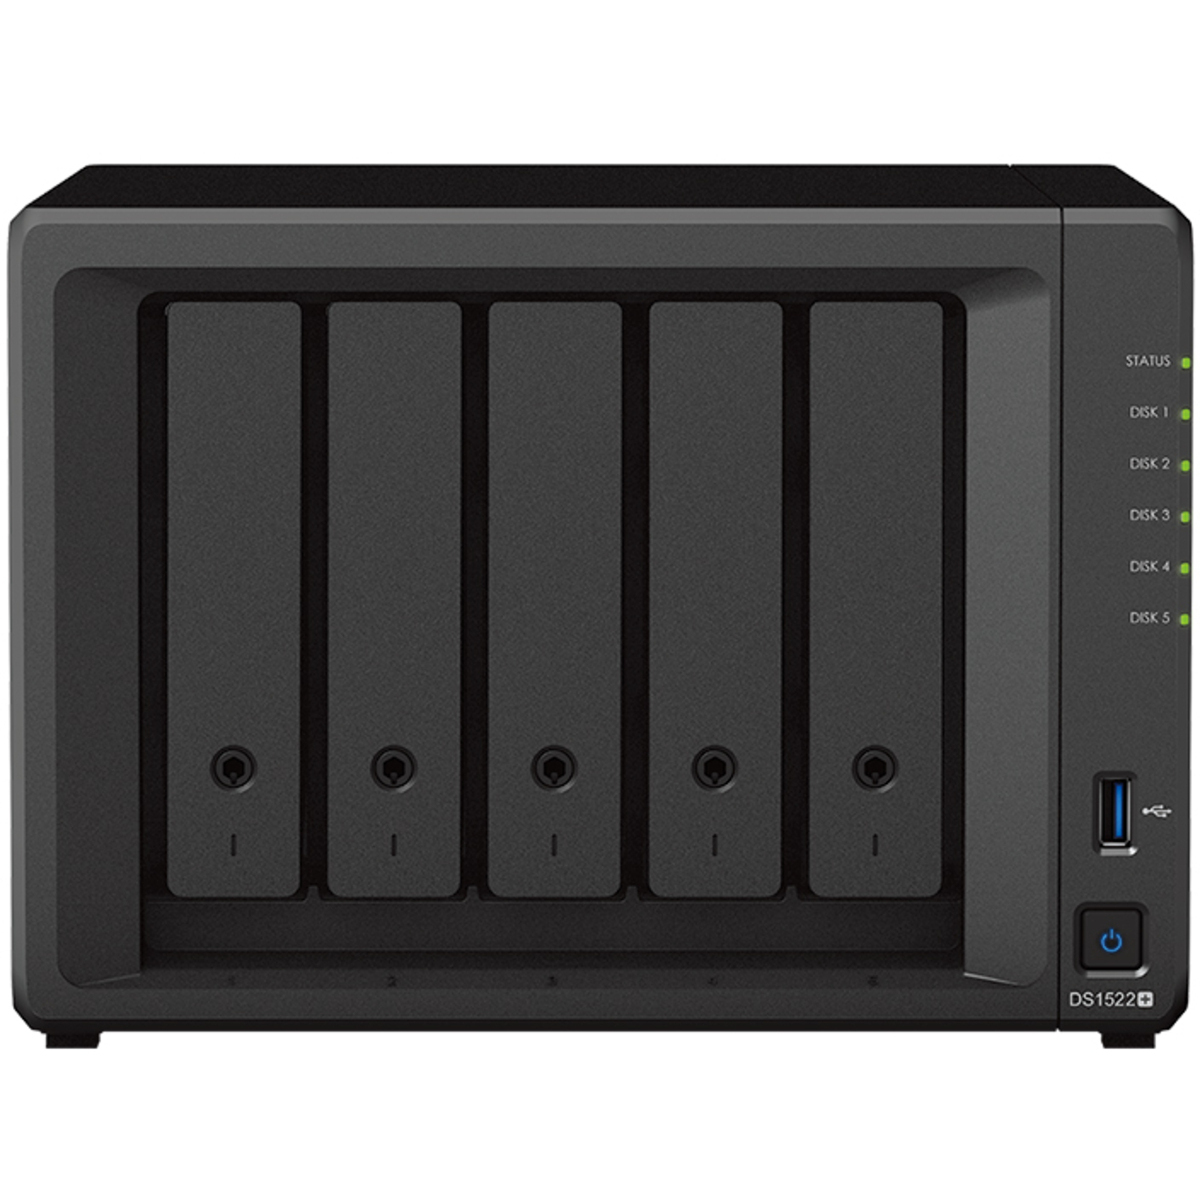 Synology DiskStation DS1522+ 100tb 5-Bay Desktop Multimedia / Power User / Business NAS - Network Attached Storage Device 5x20tb Seagate IronWolf Pro ST20000NT001 3.5 7200rpm SATA 6Gb/s HDD NAS Class Drives Installed - Burn-In Tested - ON SALE DiskStation DS1522+